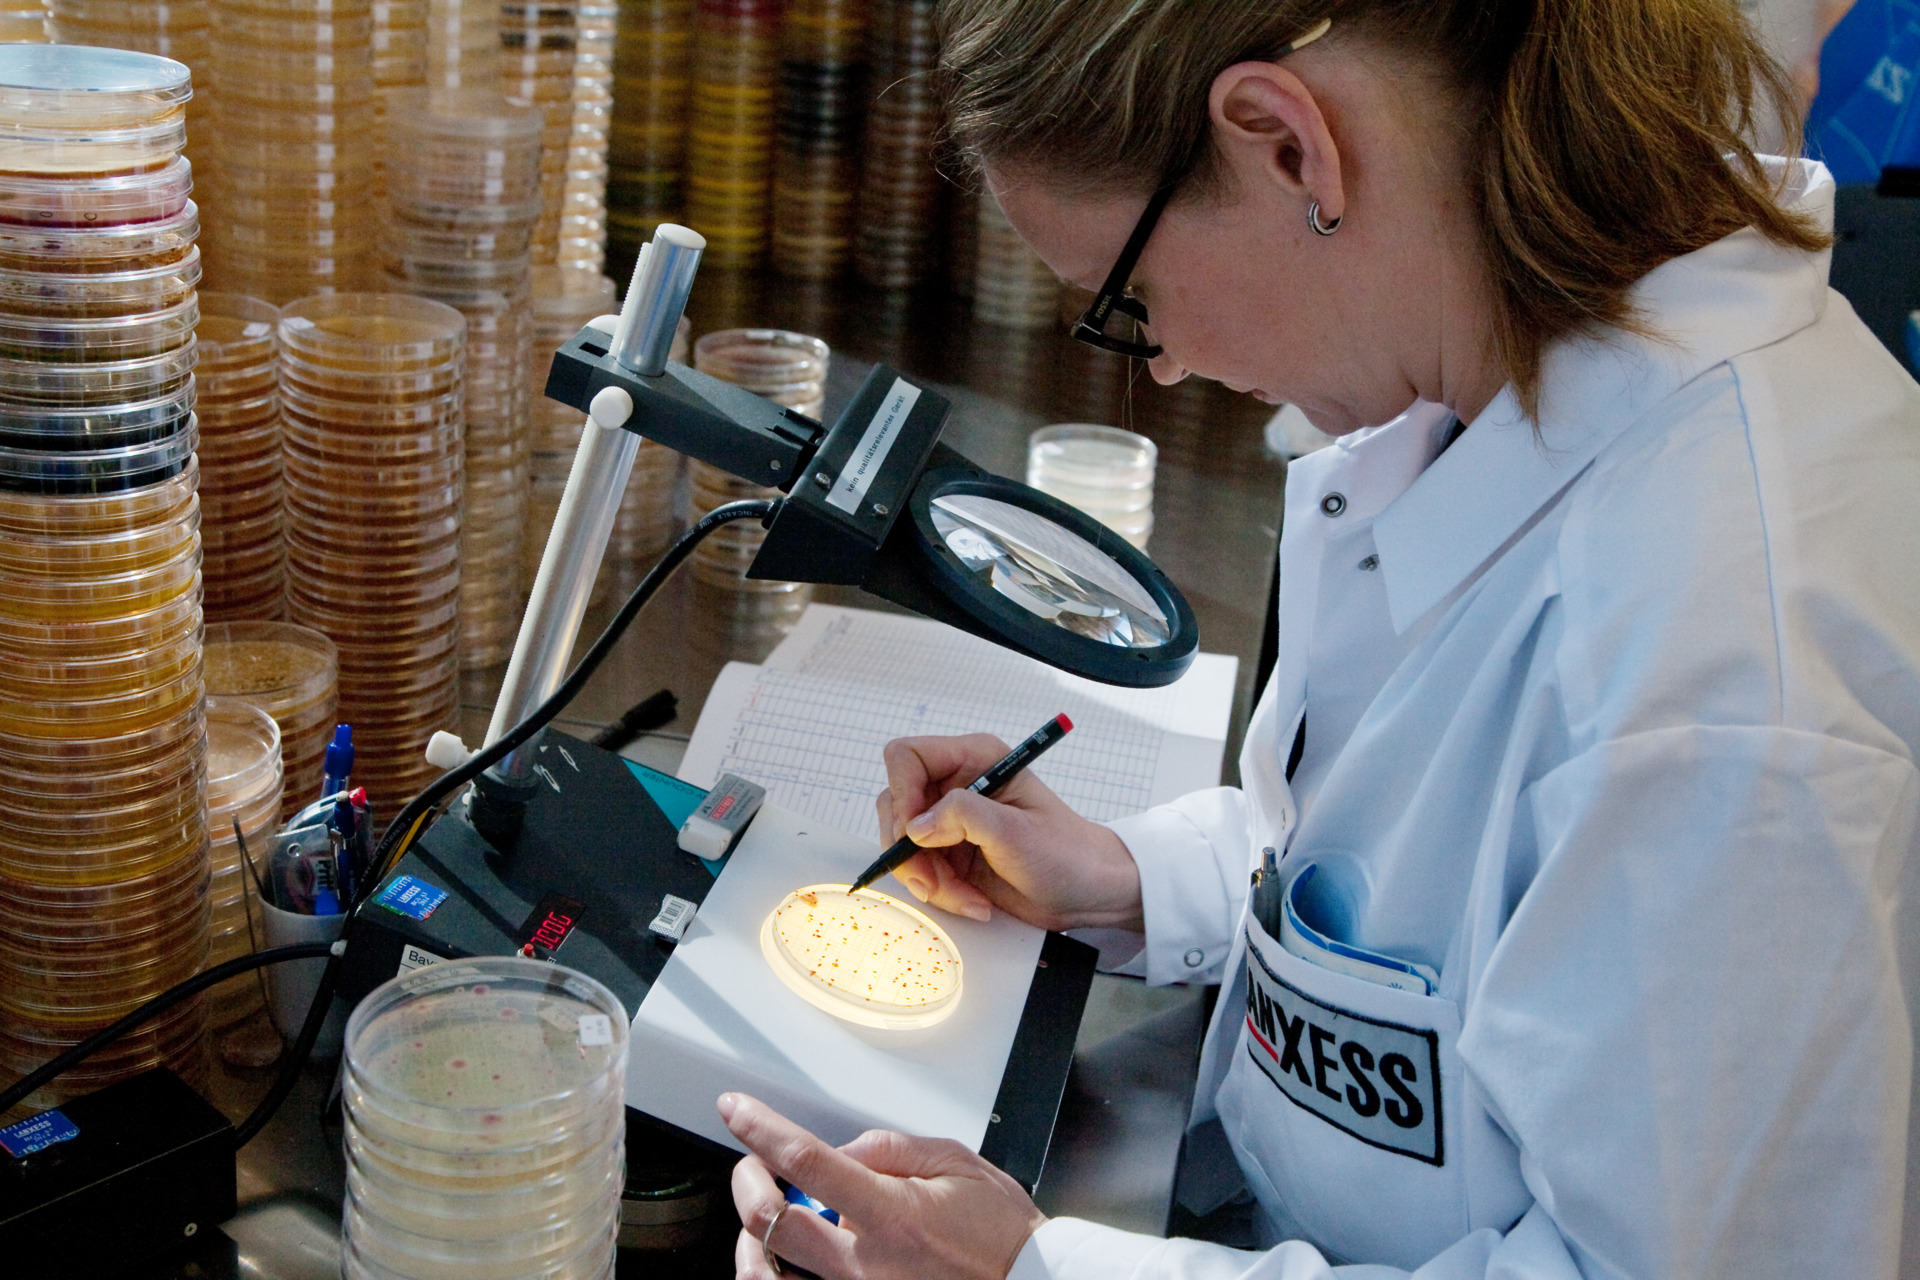 To determine the efficacy of biocidal products, different samples are examined under the microscope.